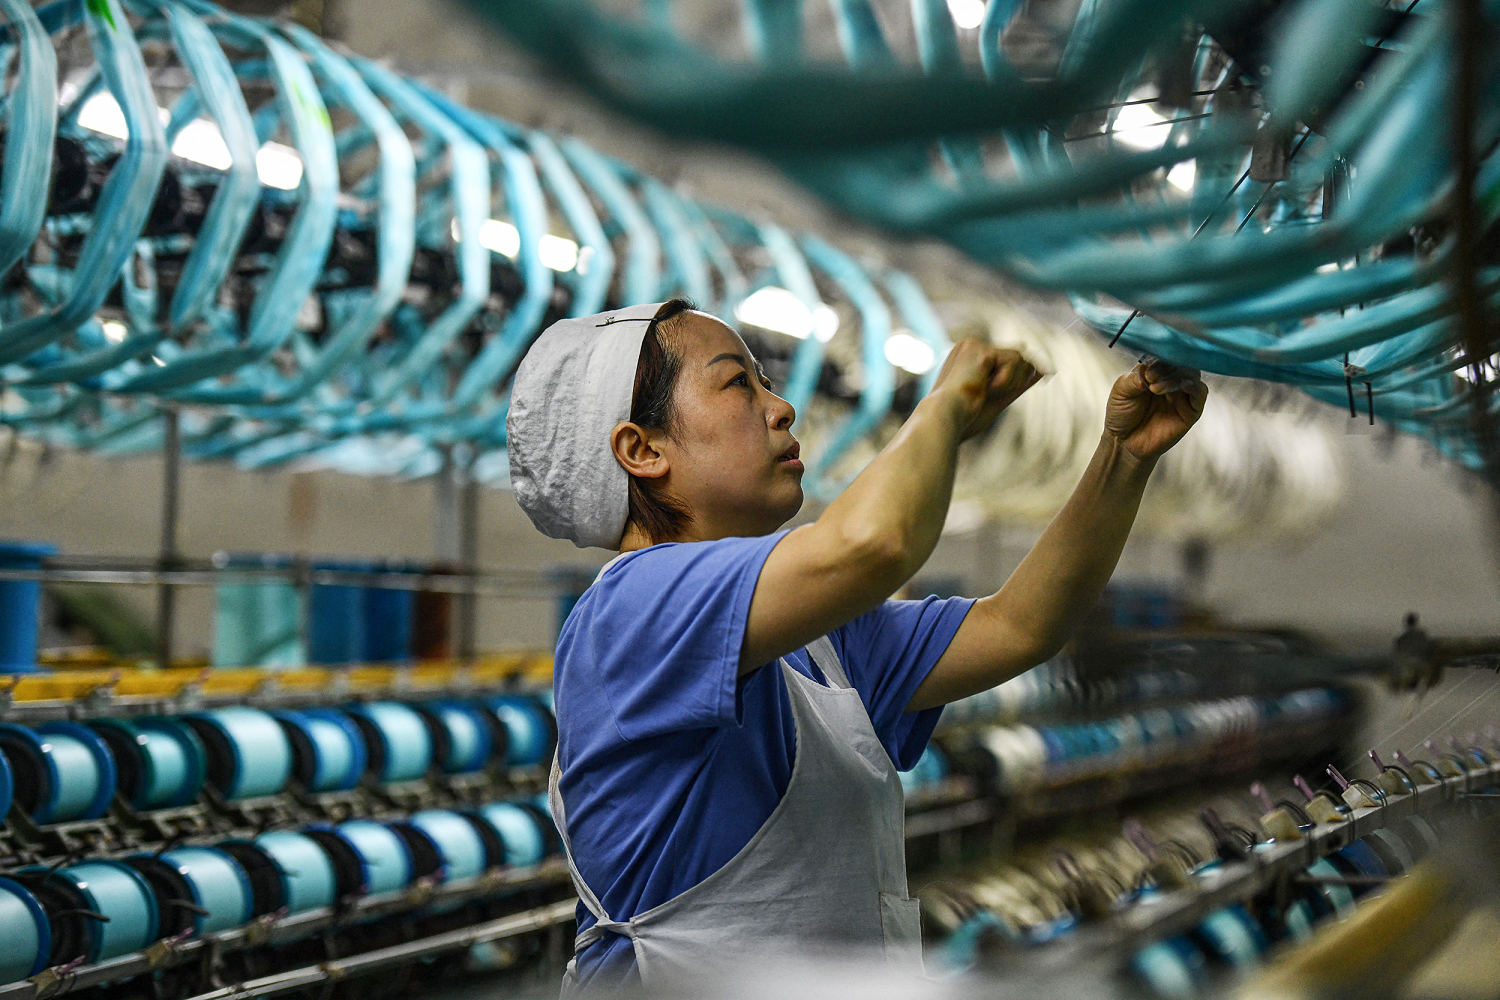 China’s economy grows 5.3% in first quarter, beating expectations